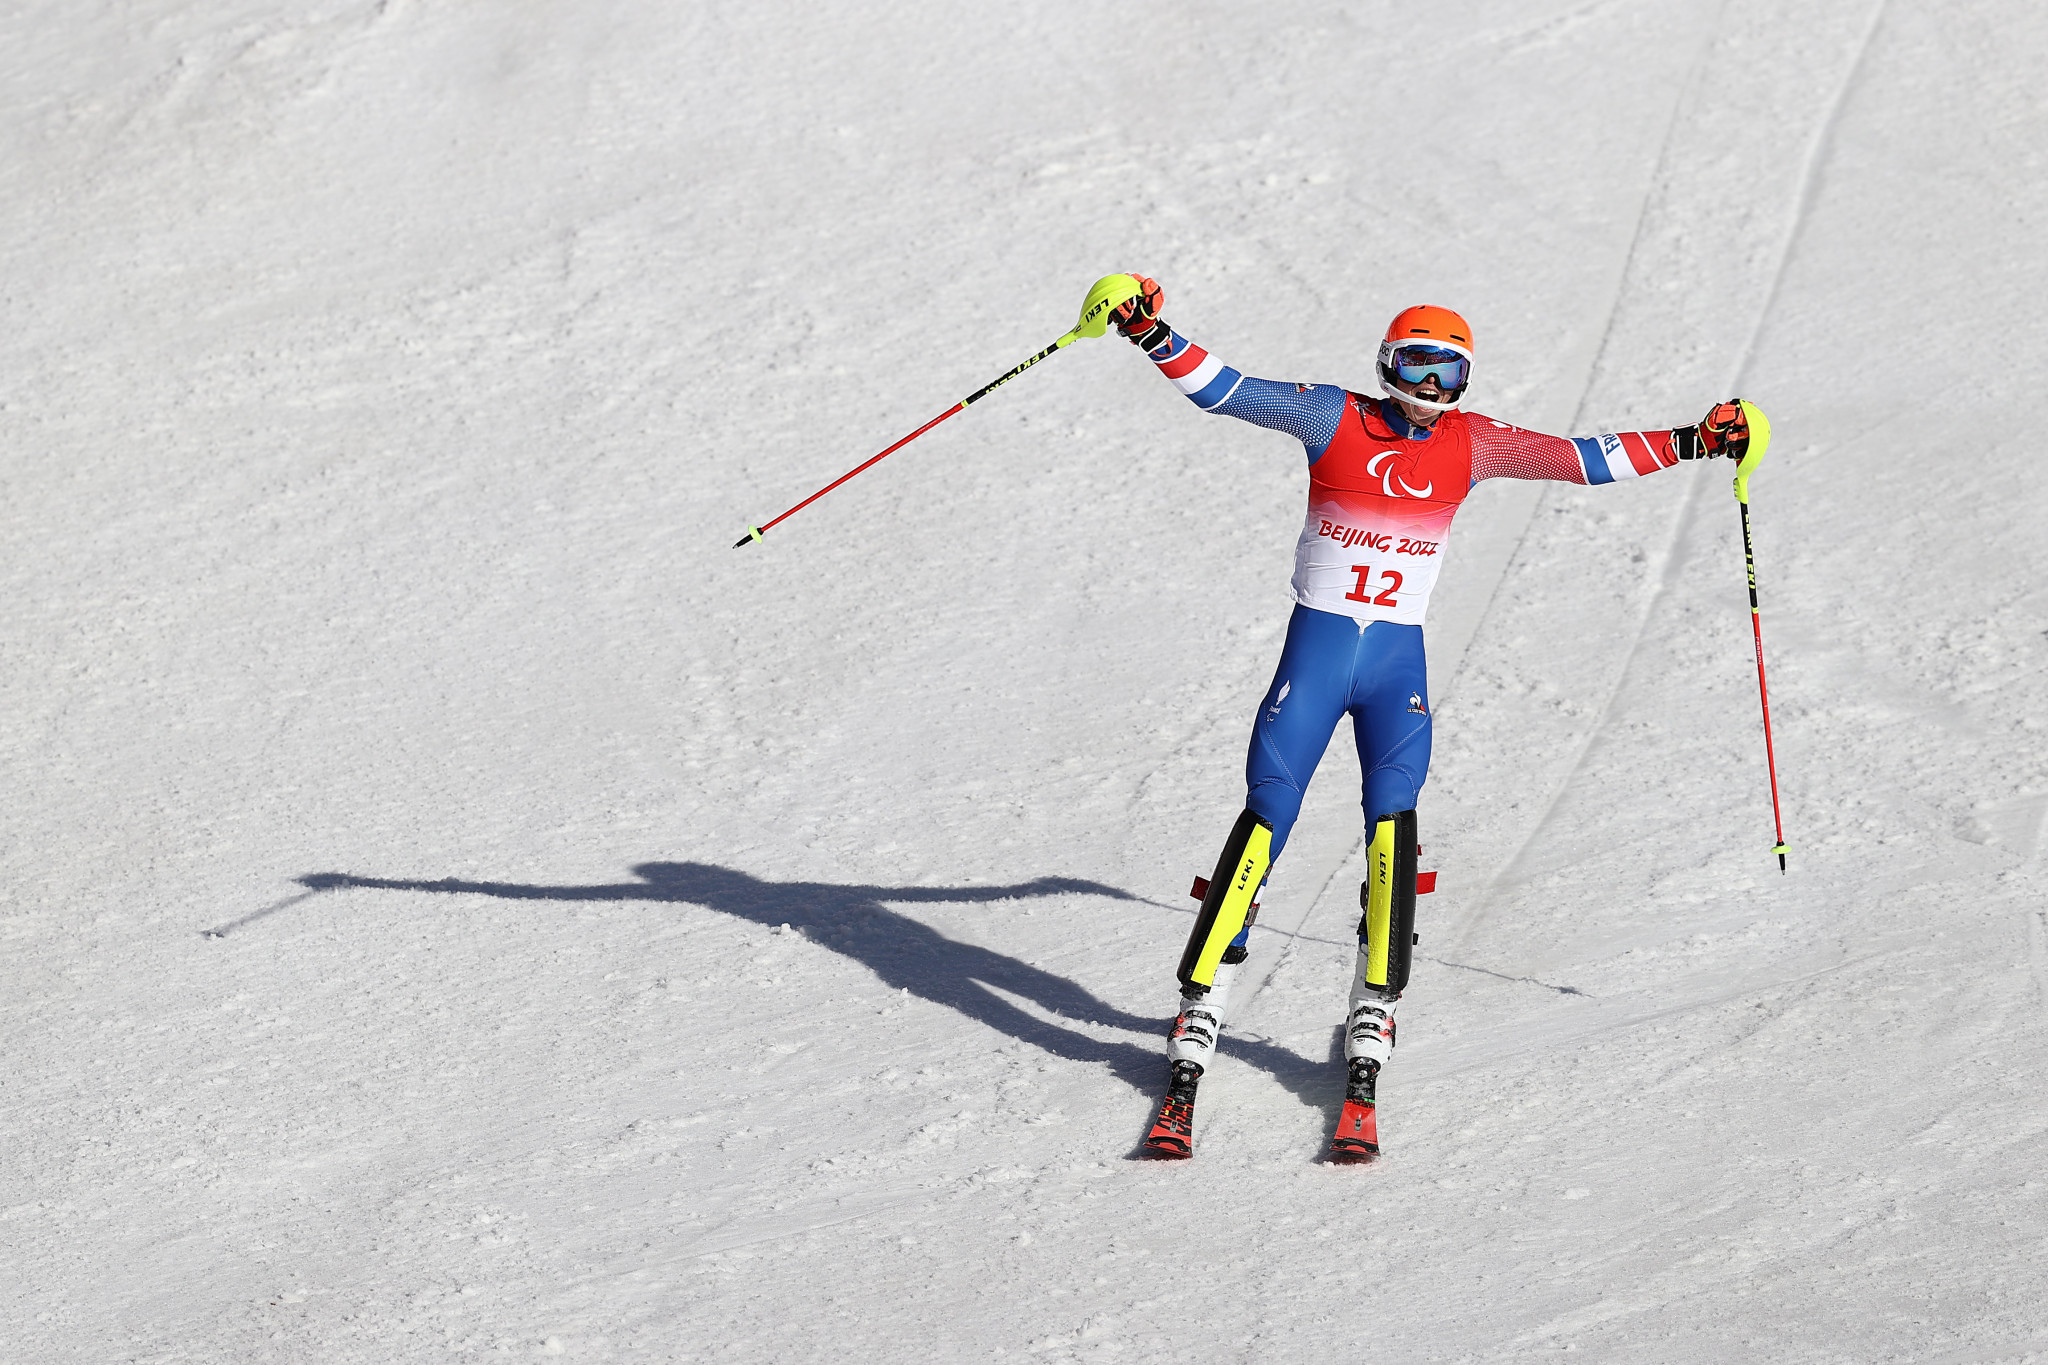 France's Arthur Bauchet secured his second gold medal of the Paralympics, winning the men's super combined standing by over four seconds ©Getty Images